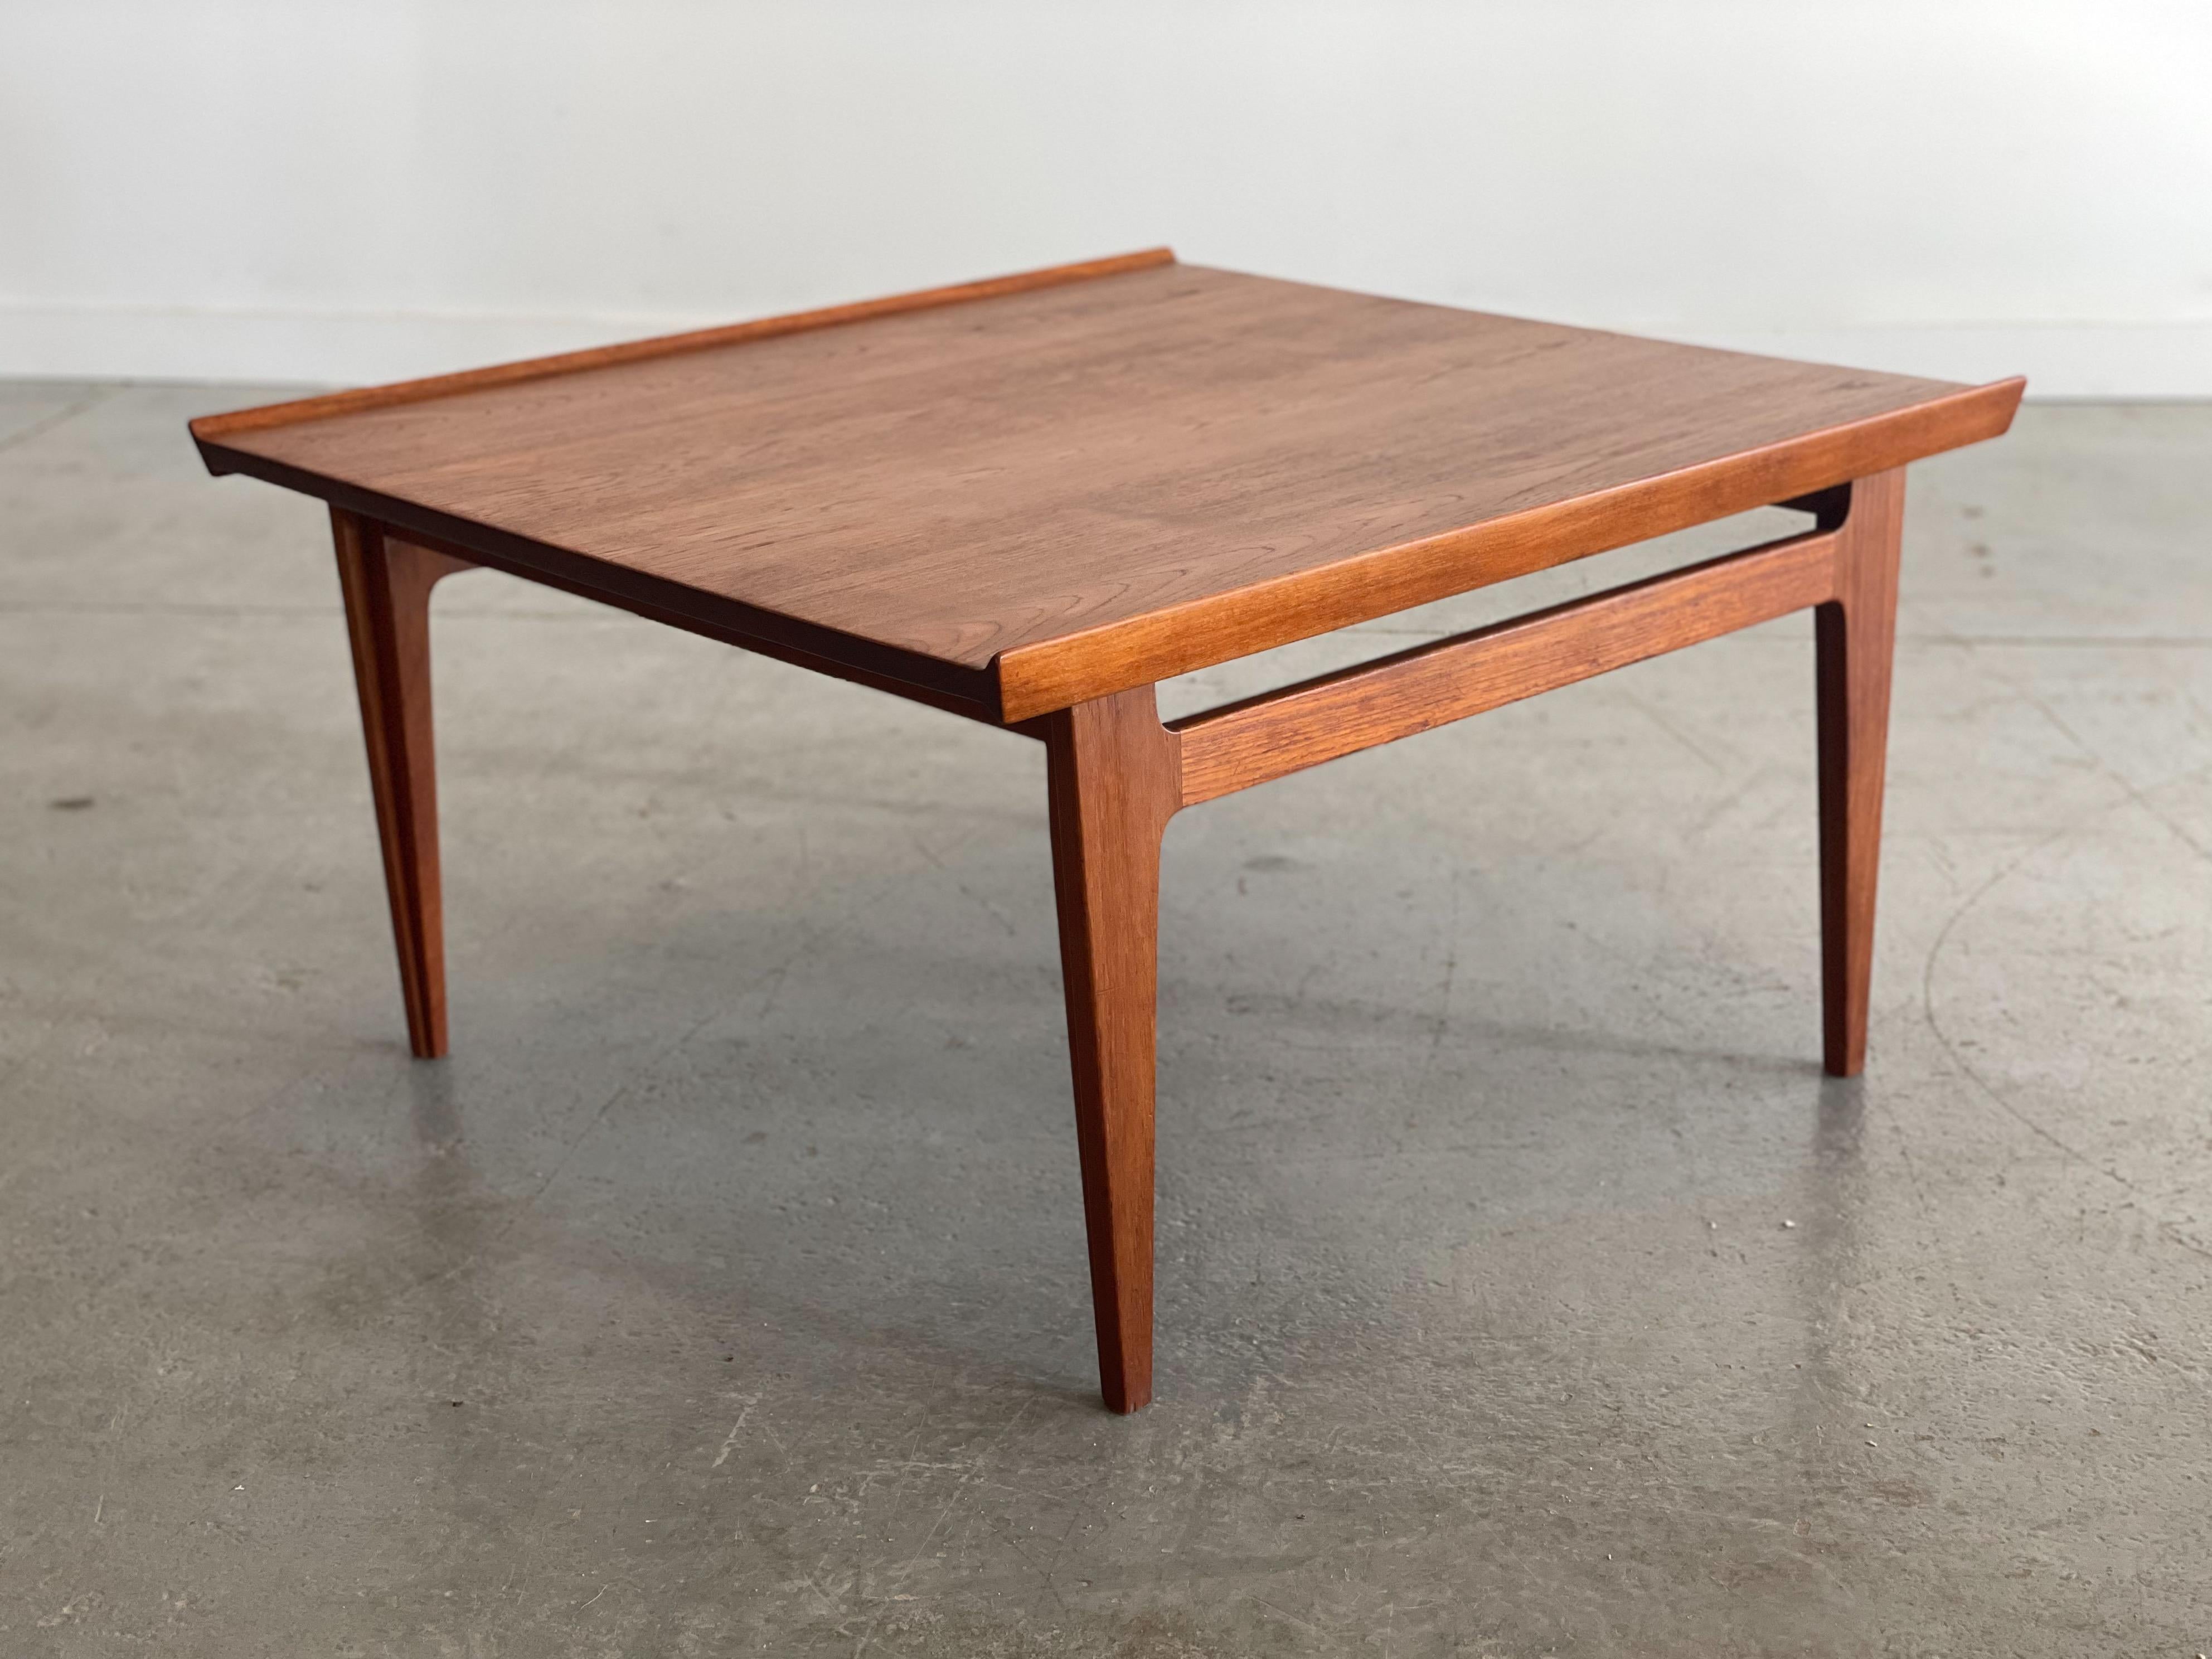 Model 500 solid teak coffee table designed by Finn Juhl for France and Son, Denmark. This stunning piece features beautifully sculpted elements characteristic of Juhl’s designs and would make an impactful statement in any living environment.